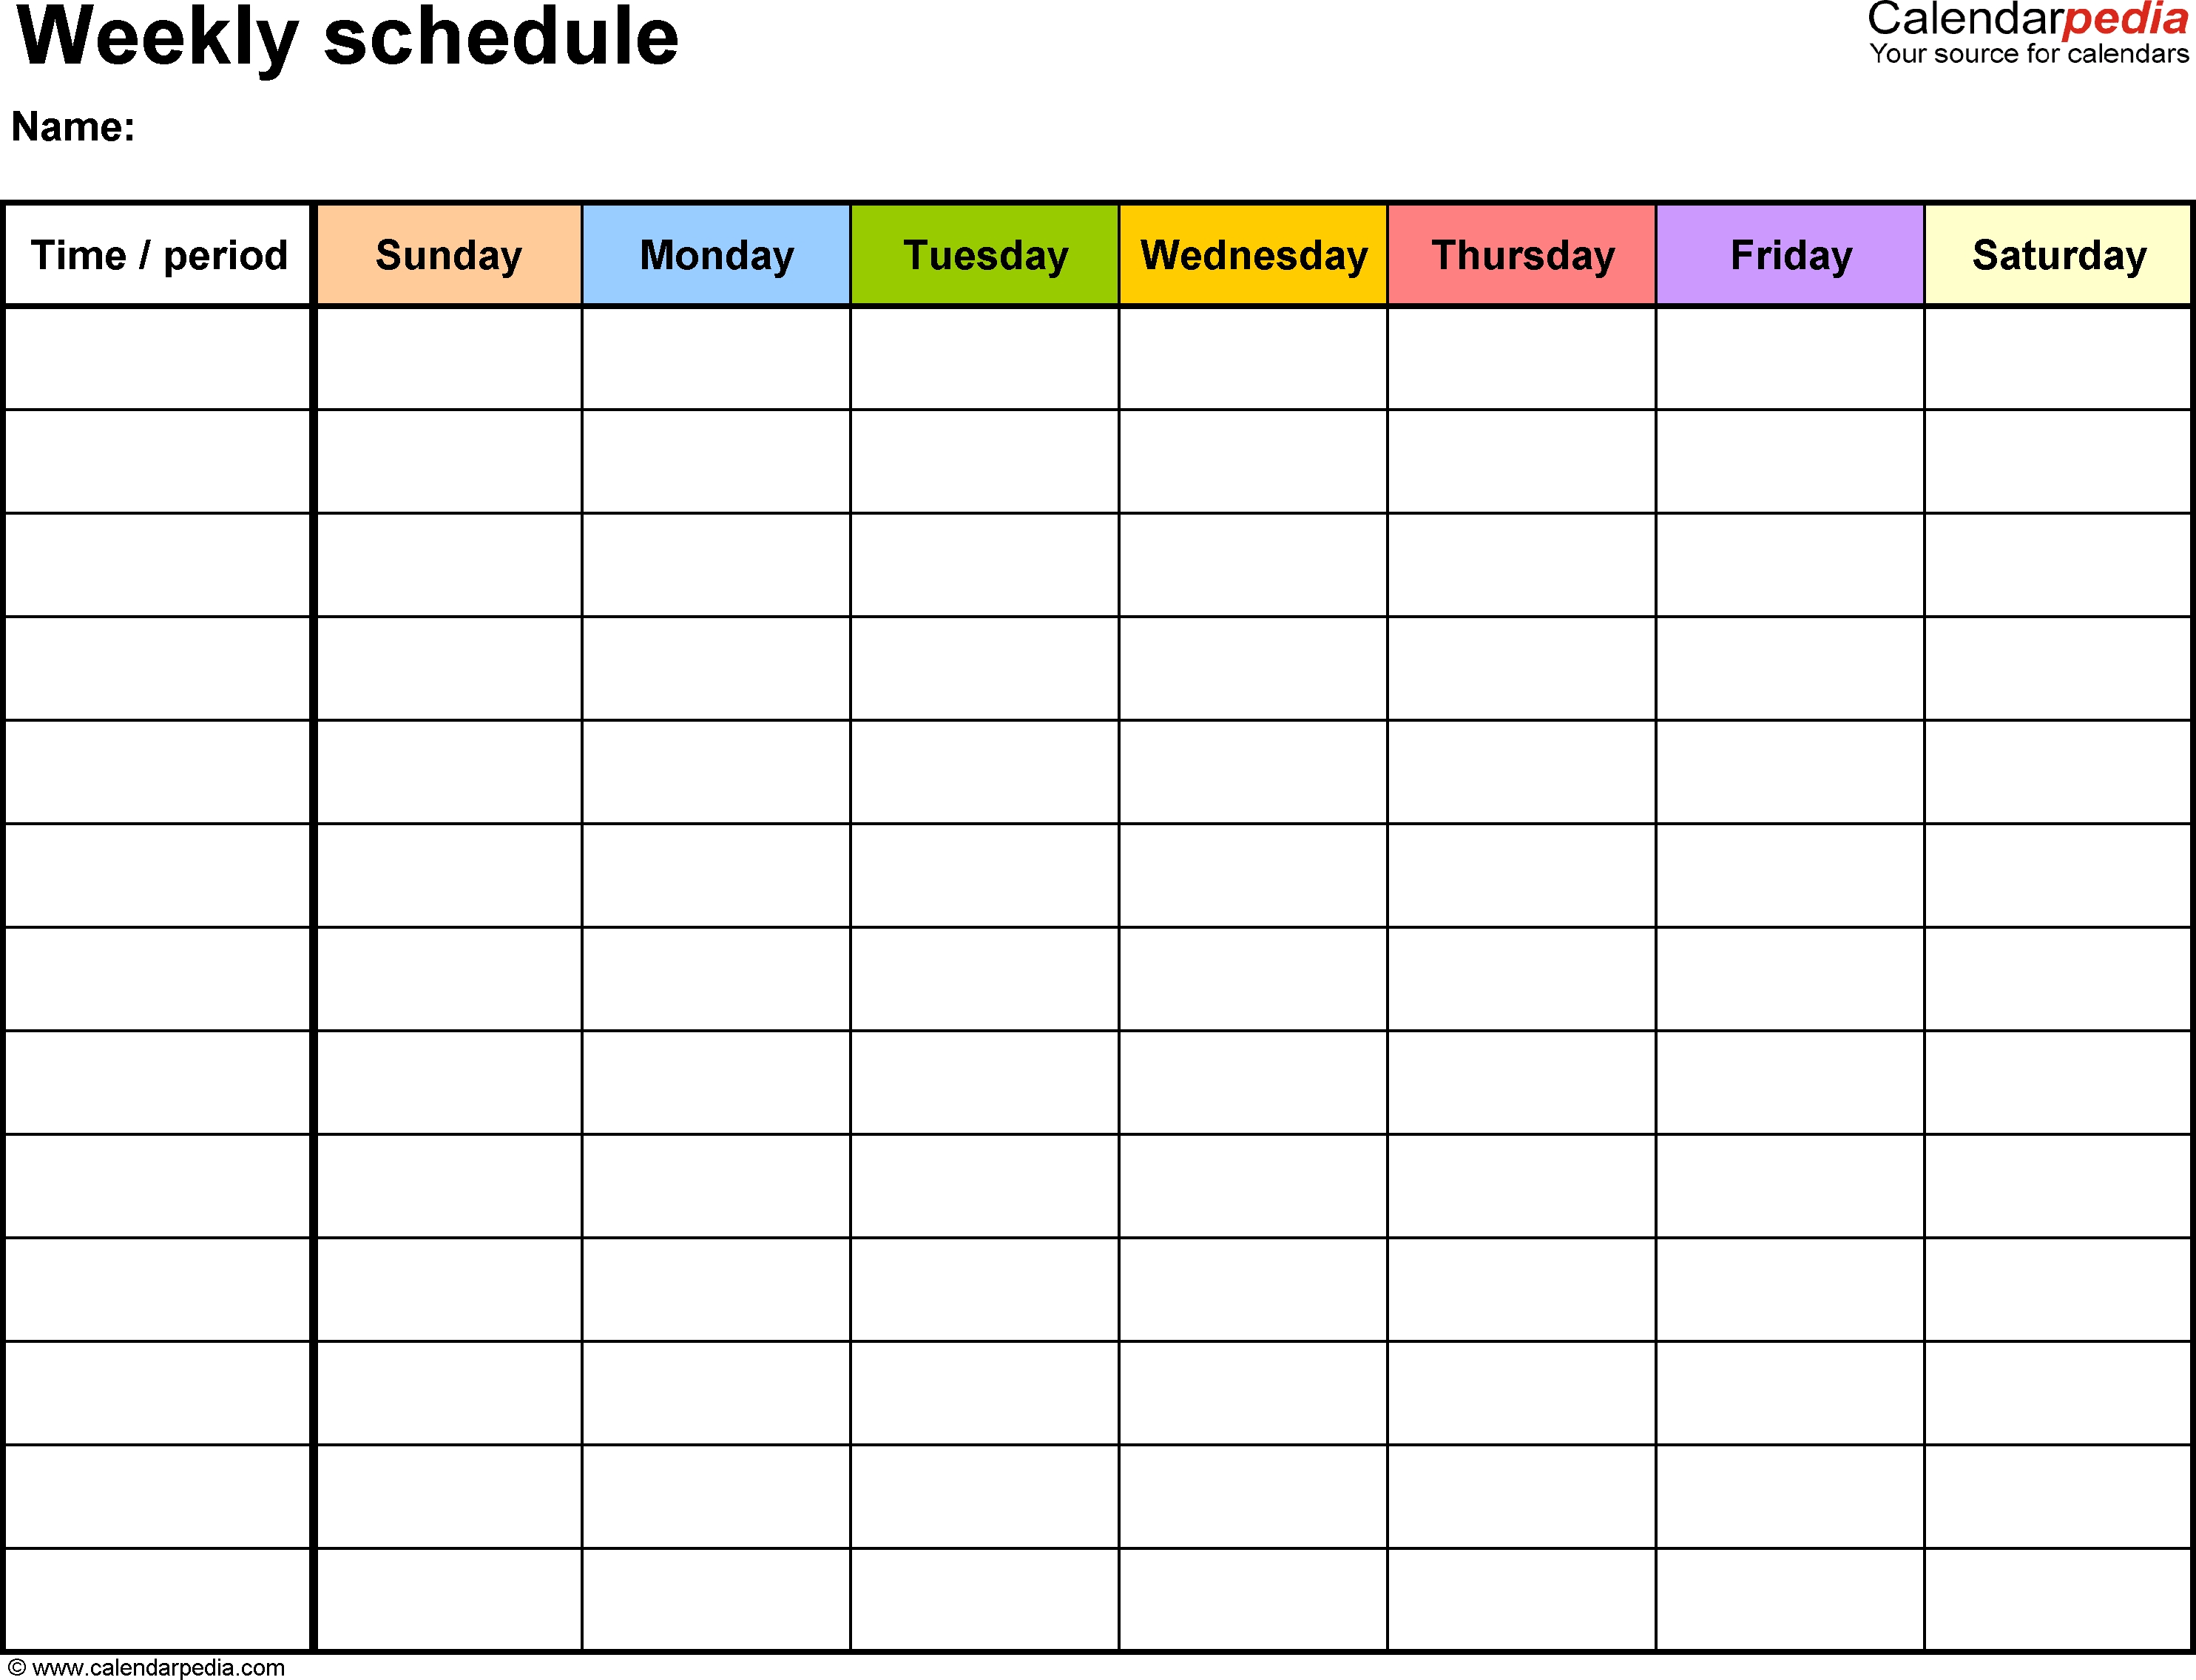 Free Weekly Schedule Templates For Word - 18 Templates  Monday Through Friday Schedule Printable